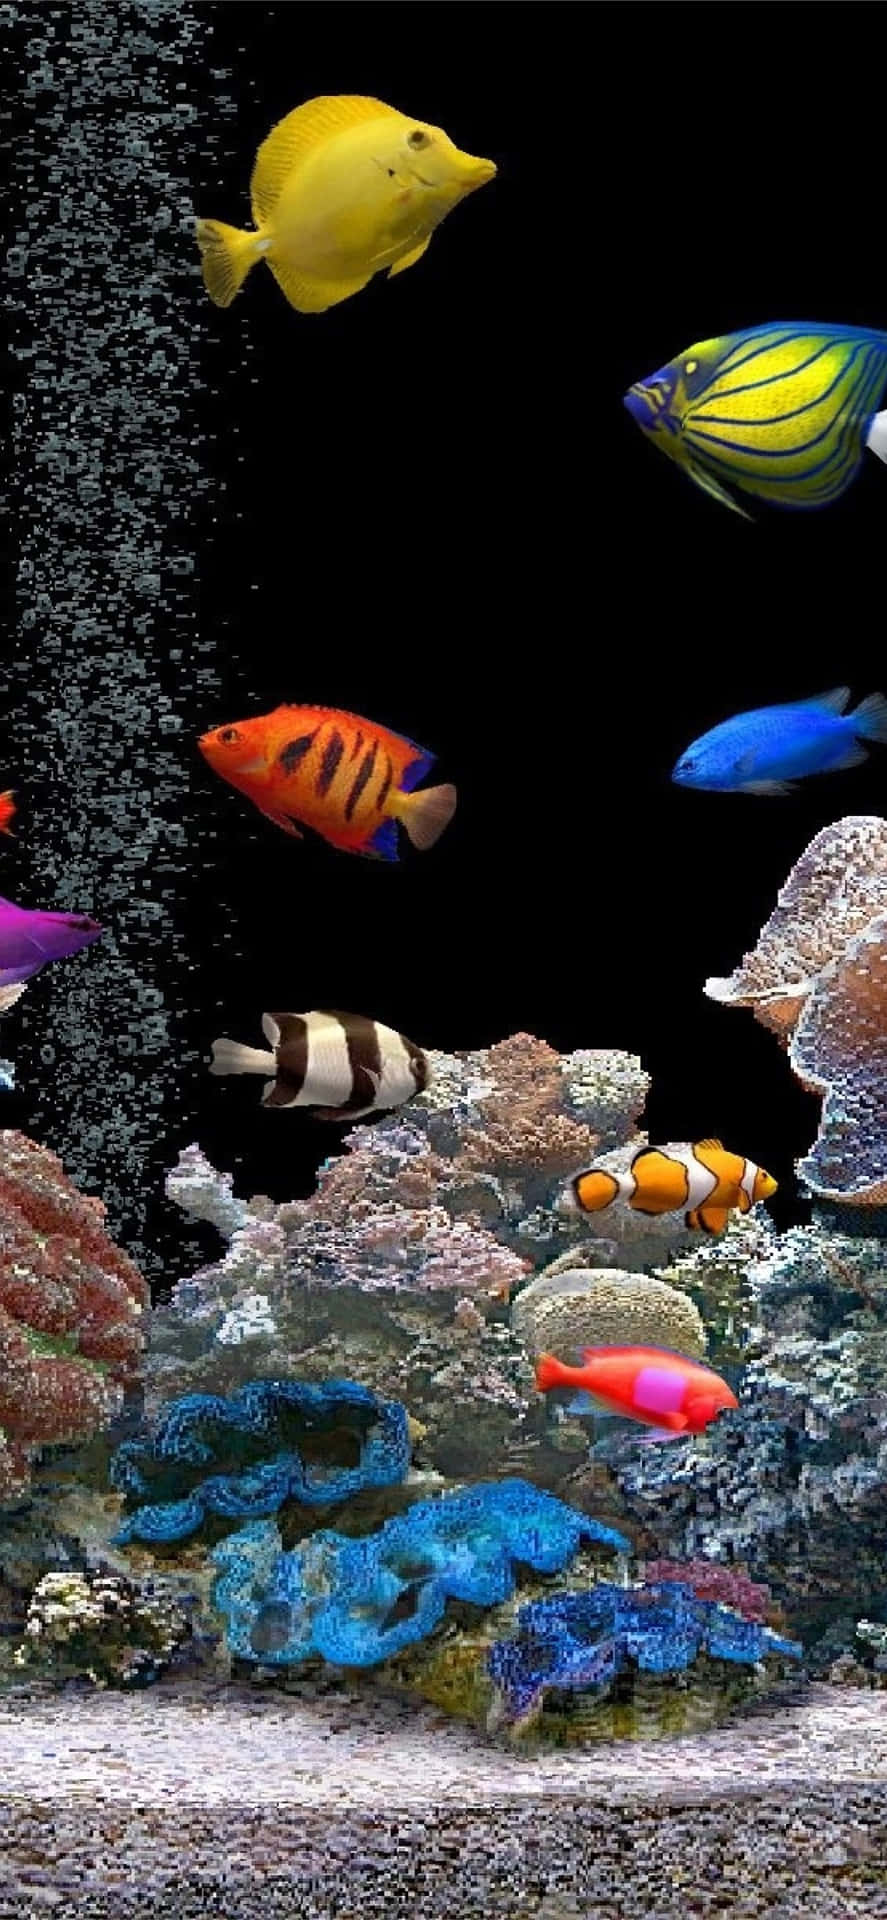 Experience an underwater escape with an aquarium-themed iPhone Wallpaper